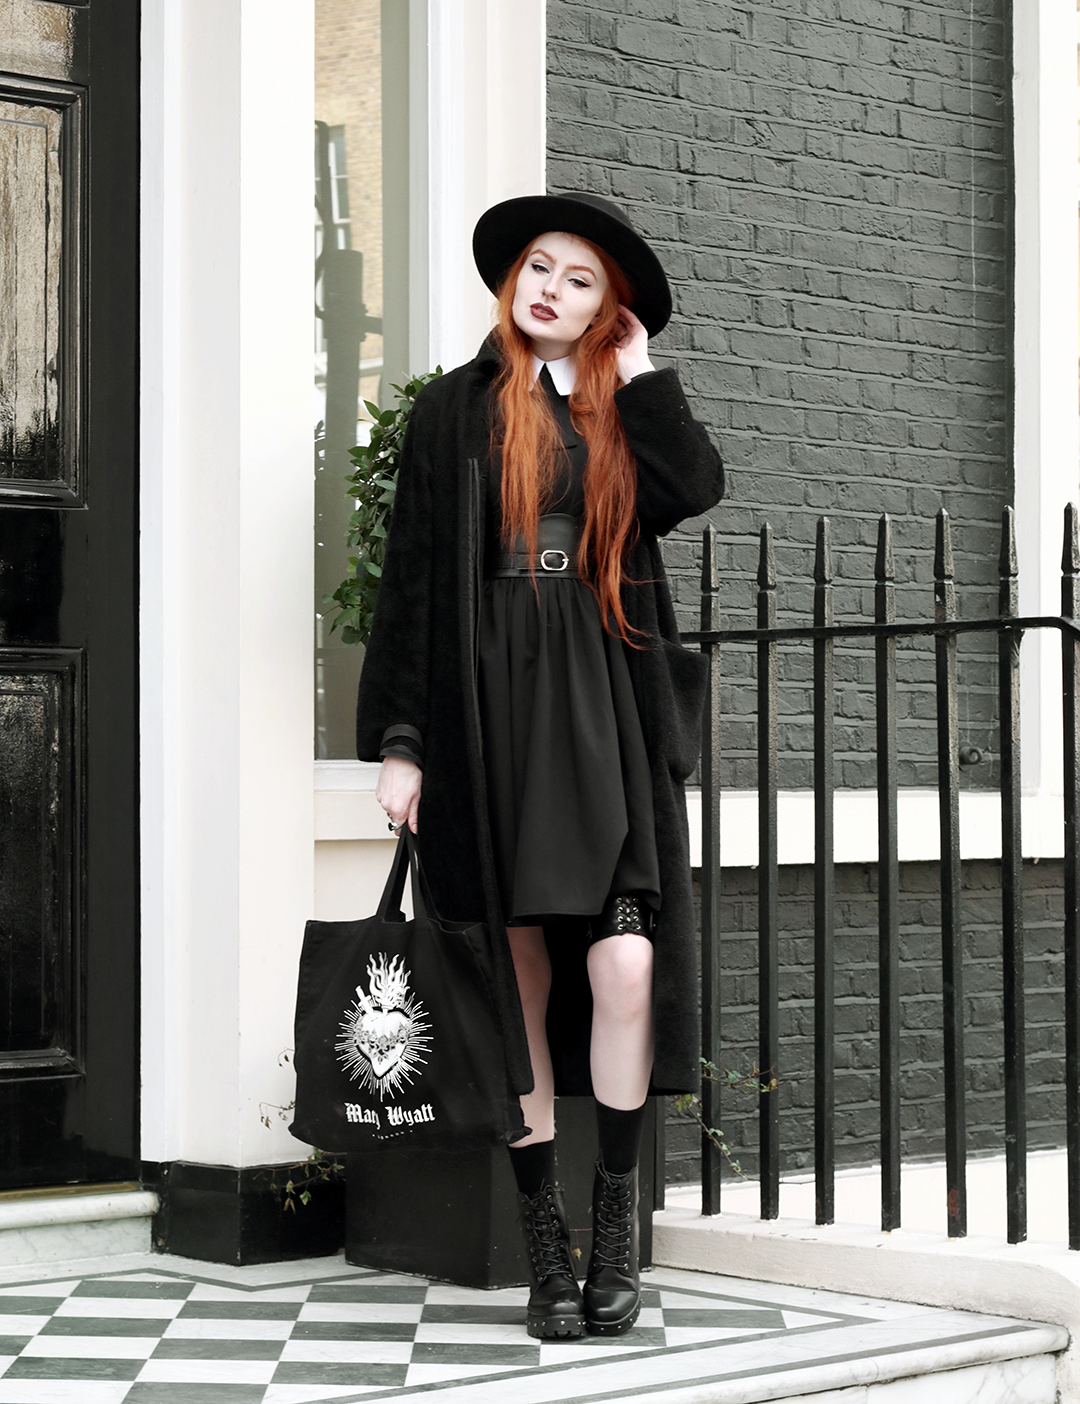 Olivia Emily styles up the Nosferatu Dress from the Deandri Cult Collection